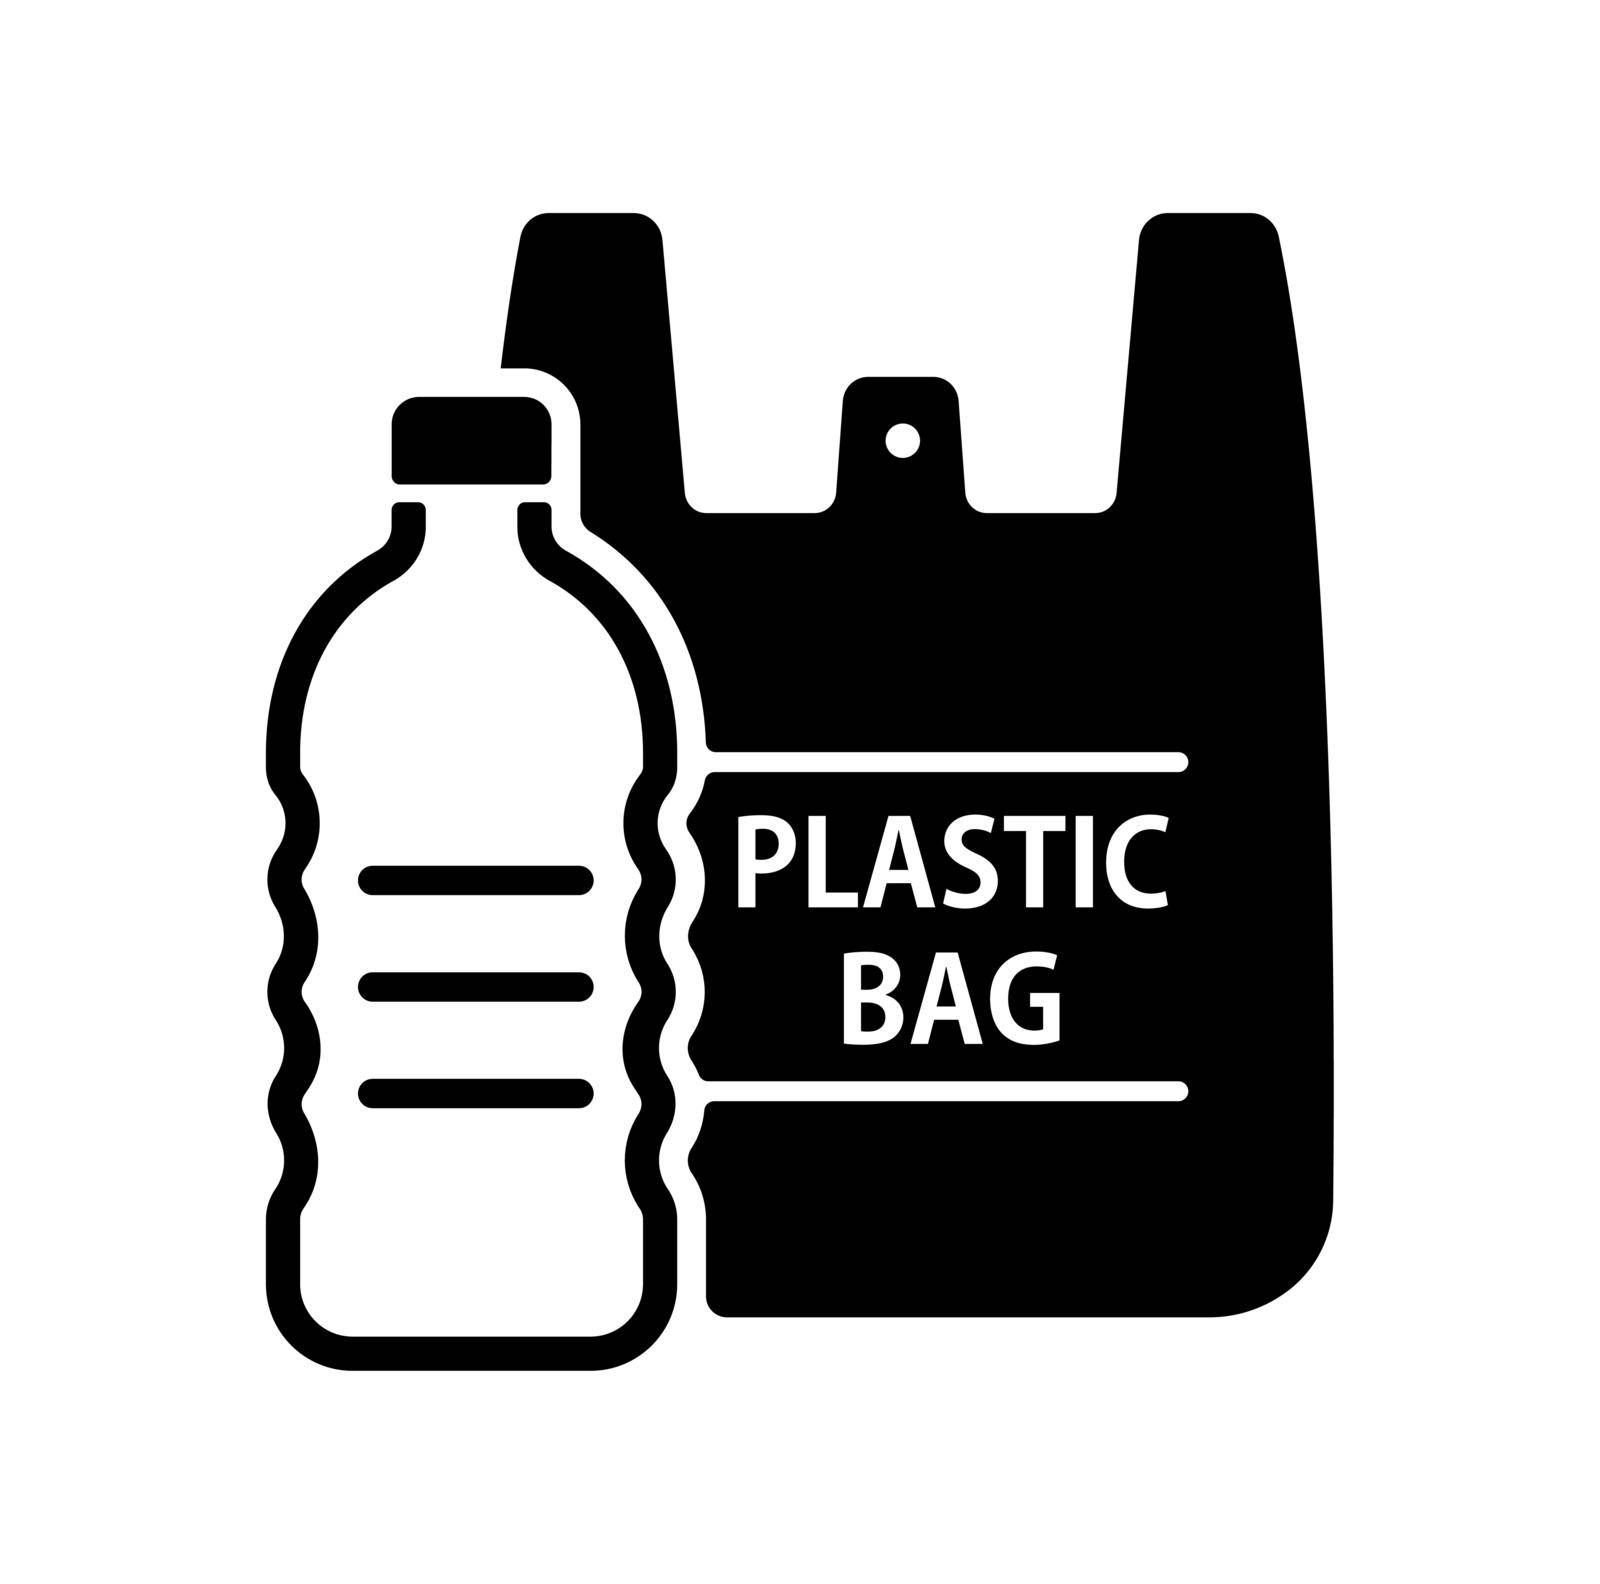 Plastic waste (palstic pollustion) vector icon illustration / ecology, recycle symbol